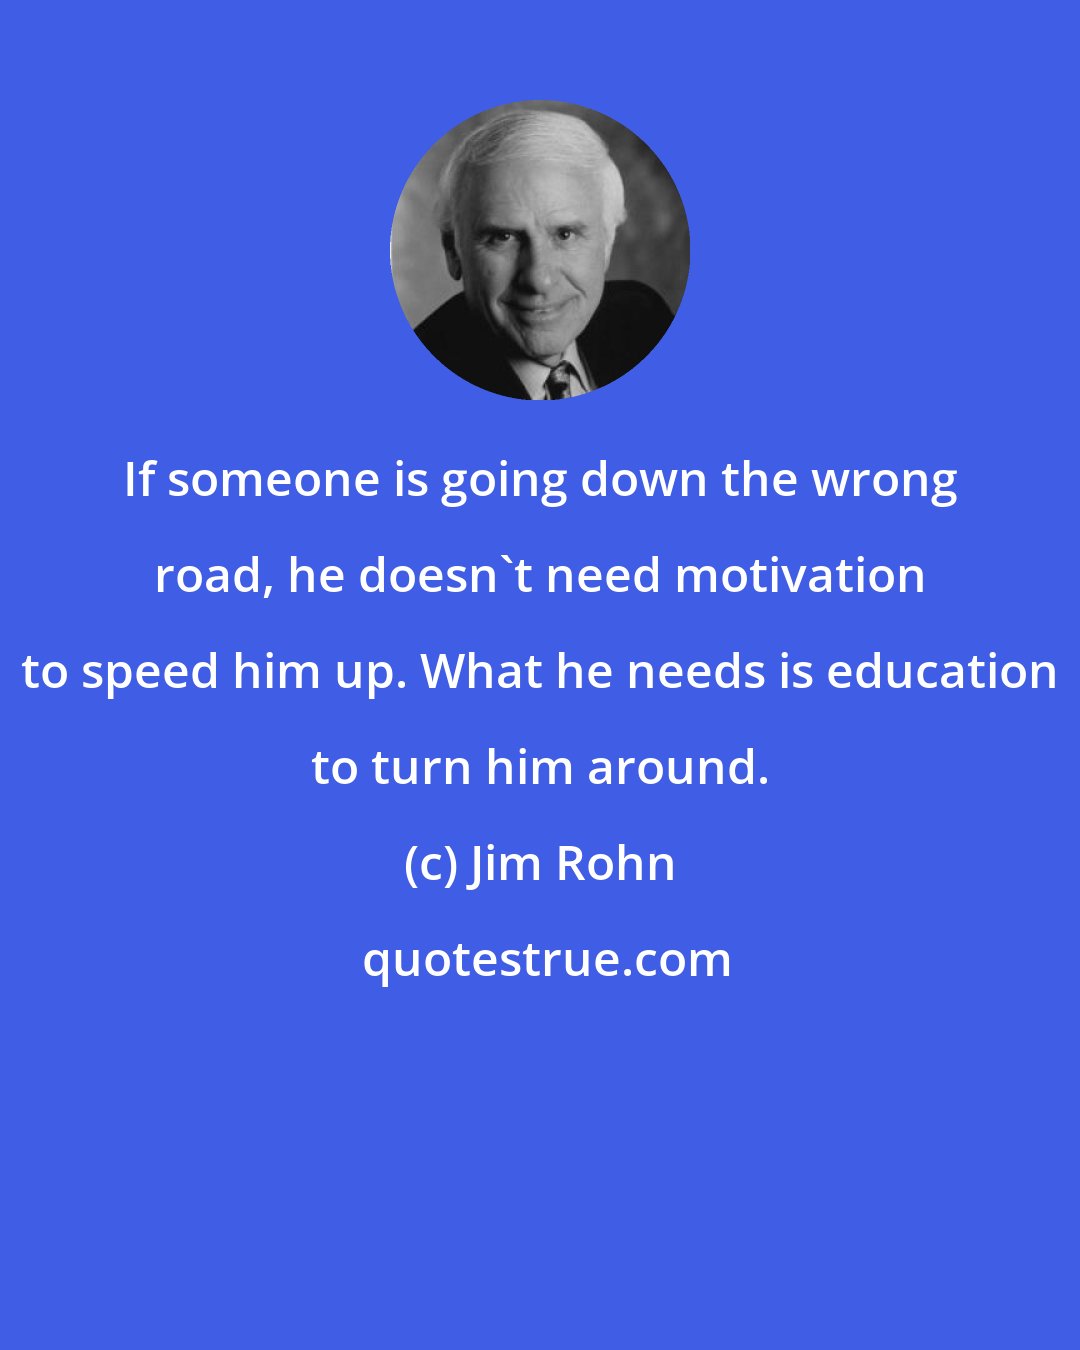 Jim Rohn: If someone is going down the wrong road, he doesn't need motivation to speed him up. What he needs is education to turn him around.